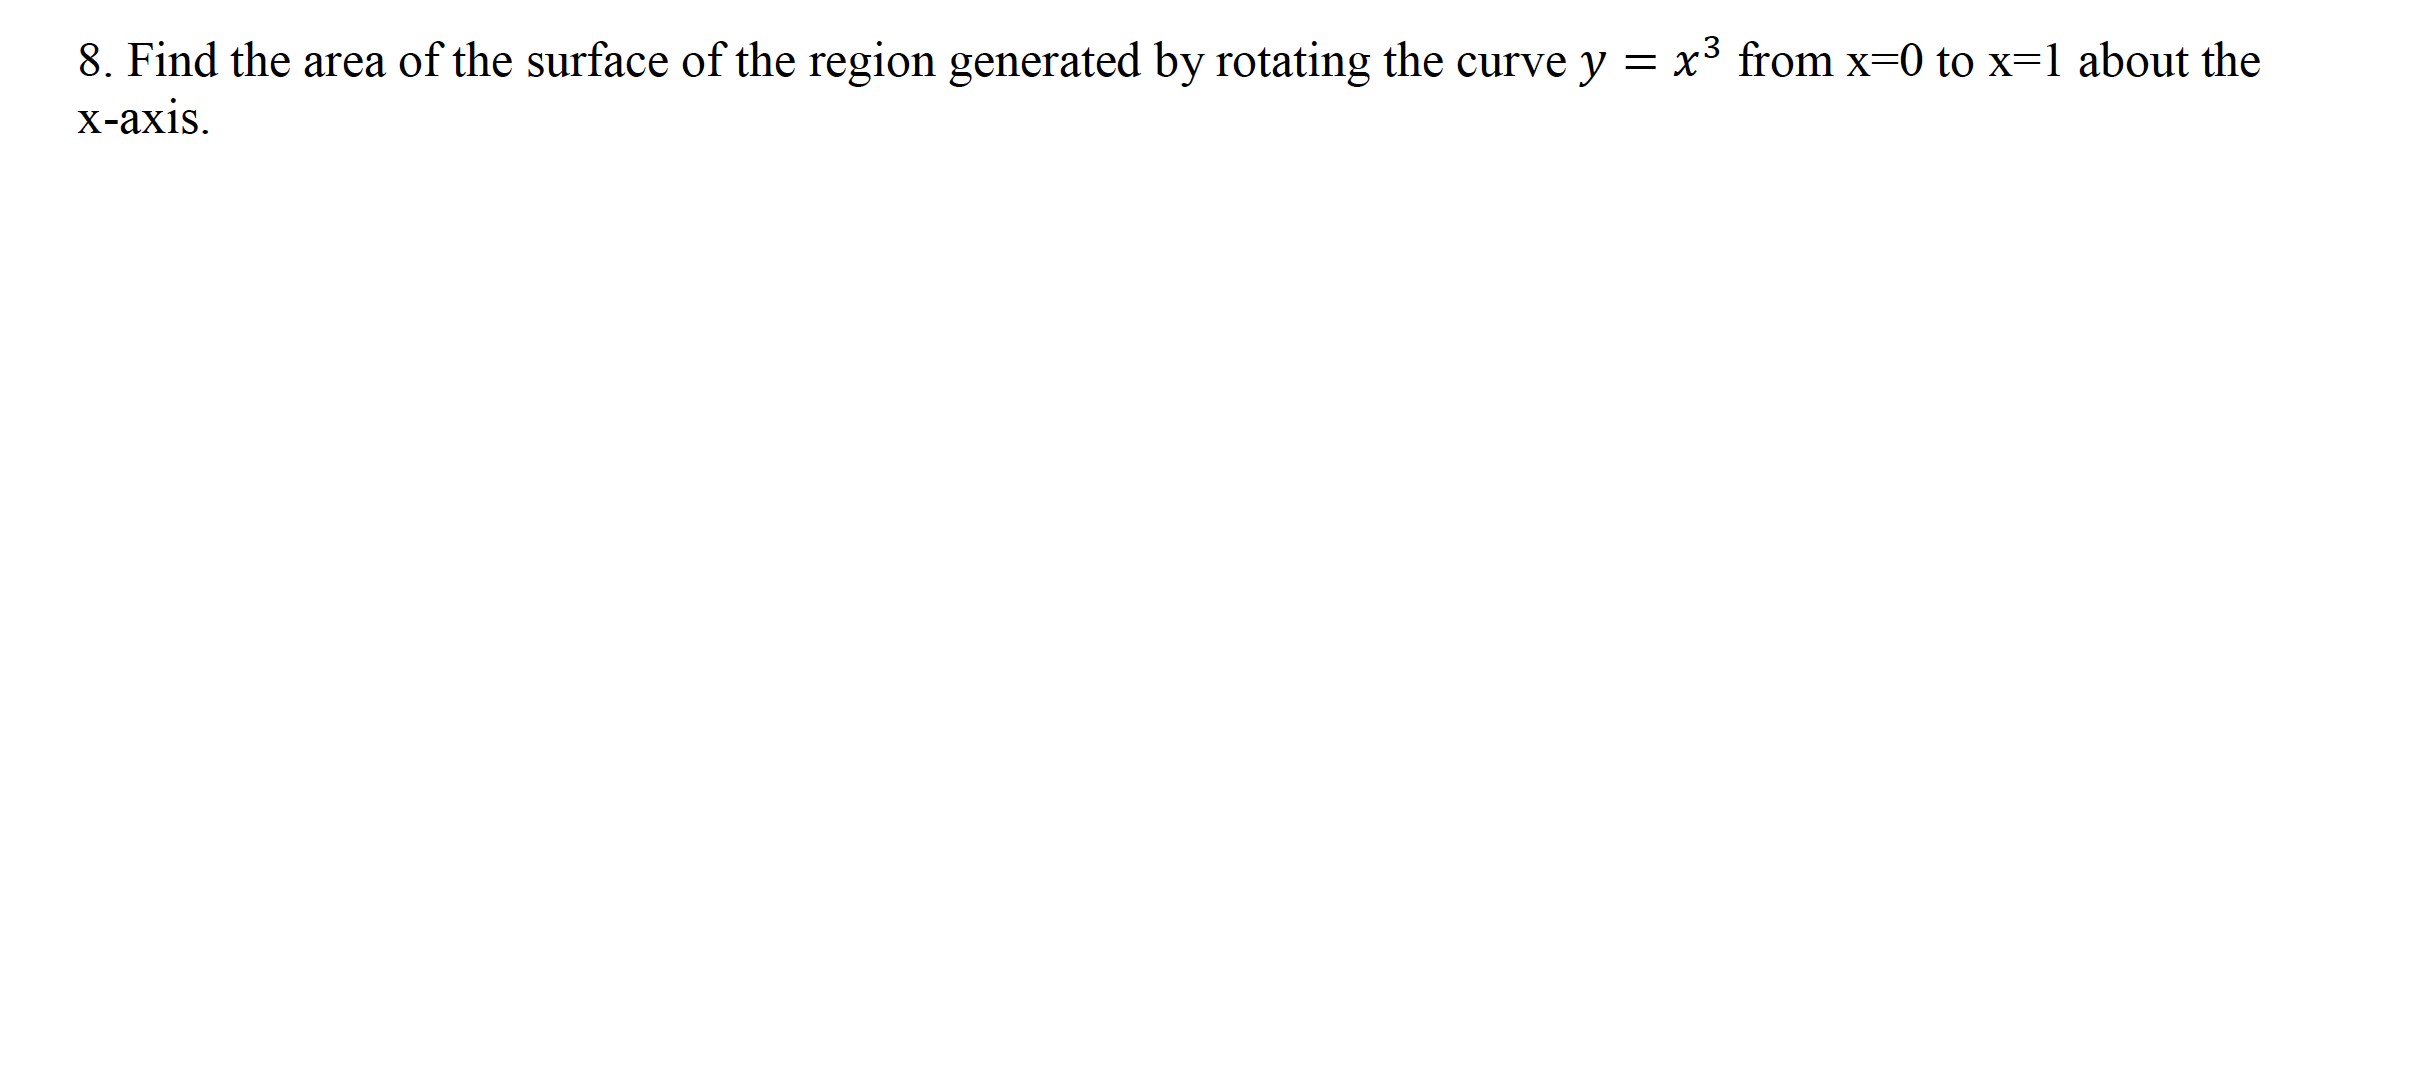 8. Find the area of the surface of the region generated by rotating the curve y = x³ from x=0 to x=1 about the
X-ахis.
